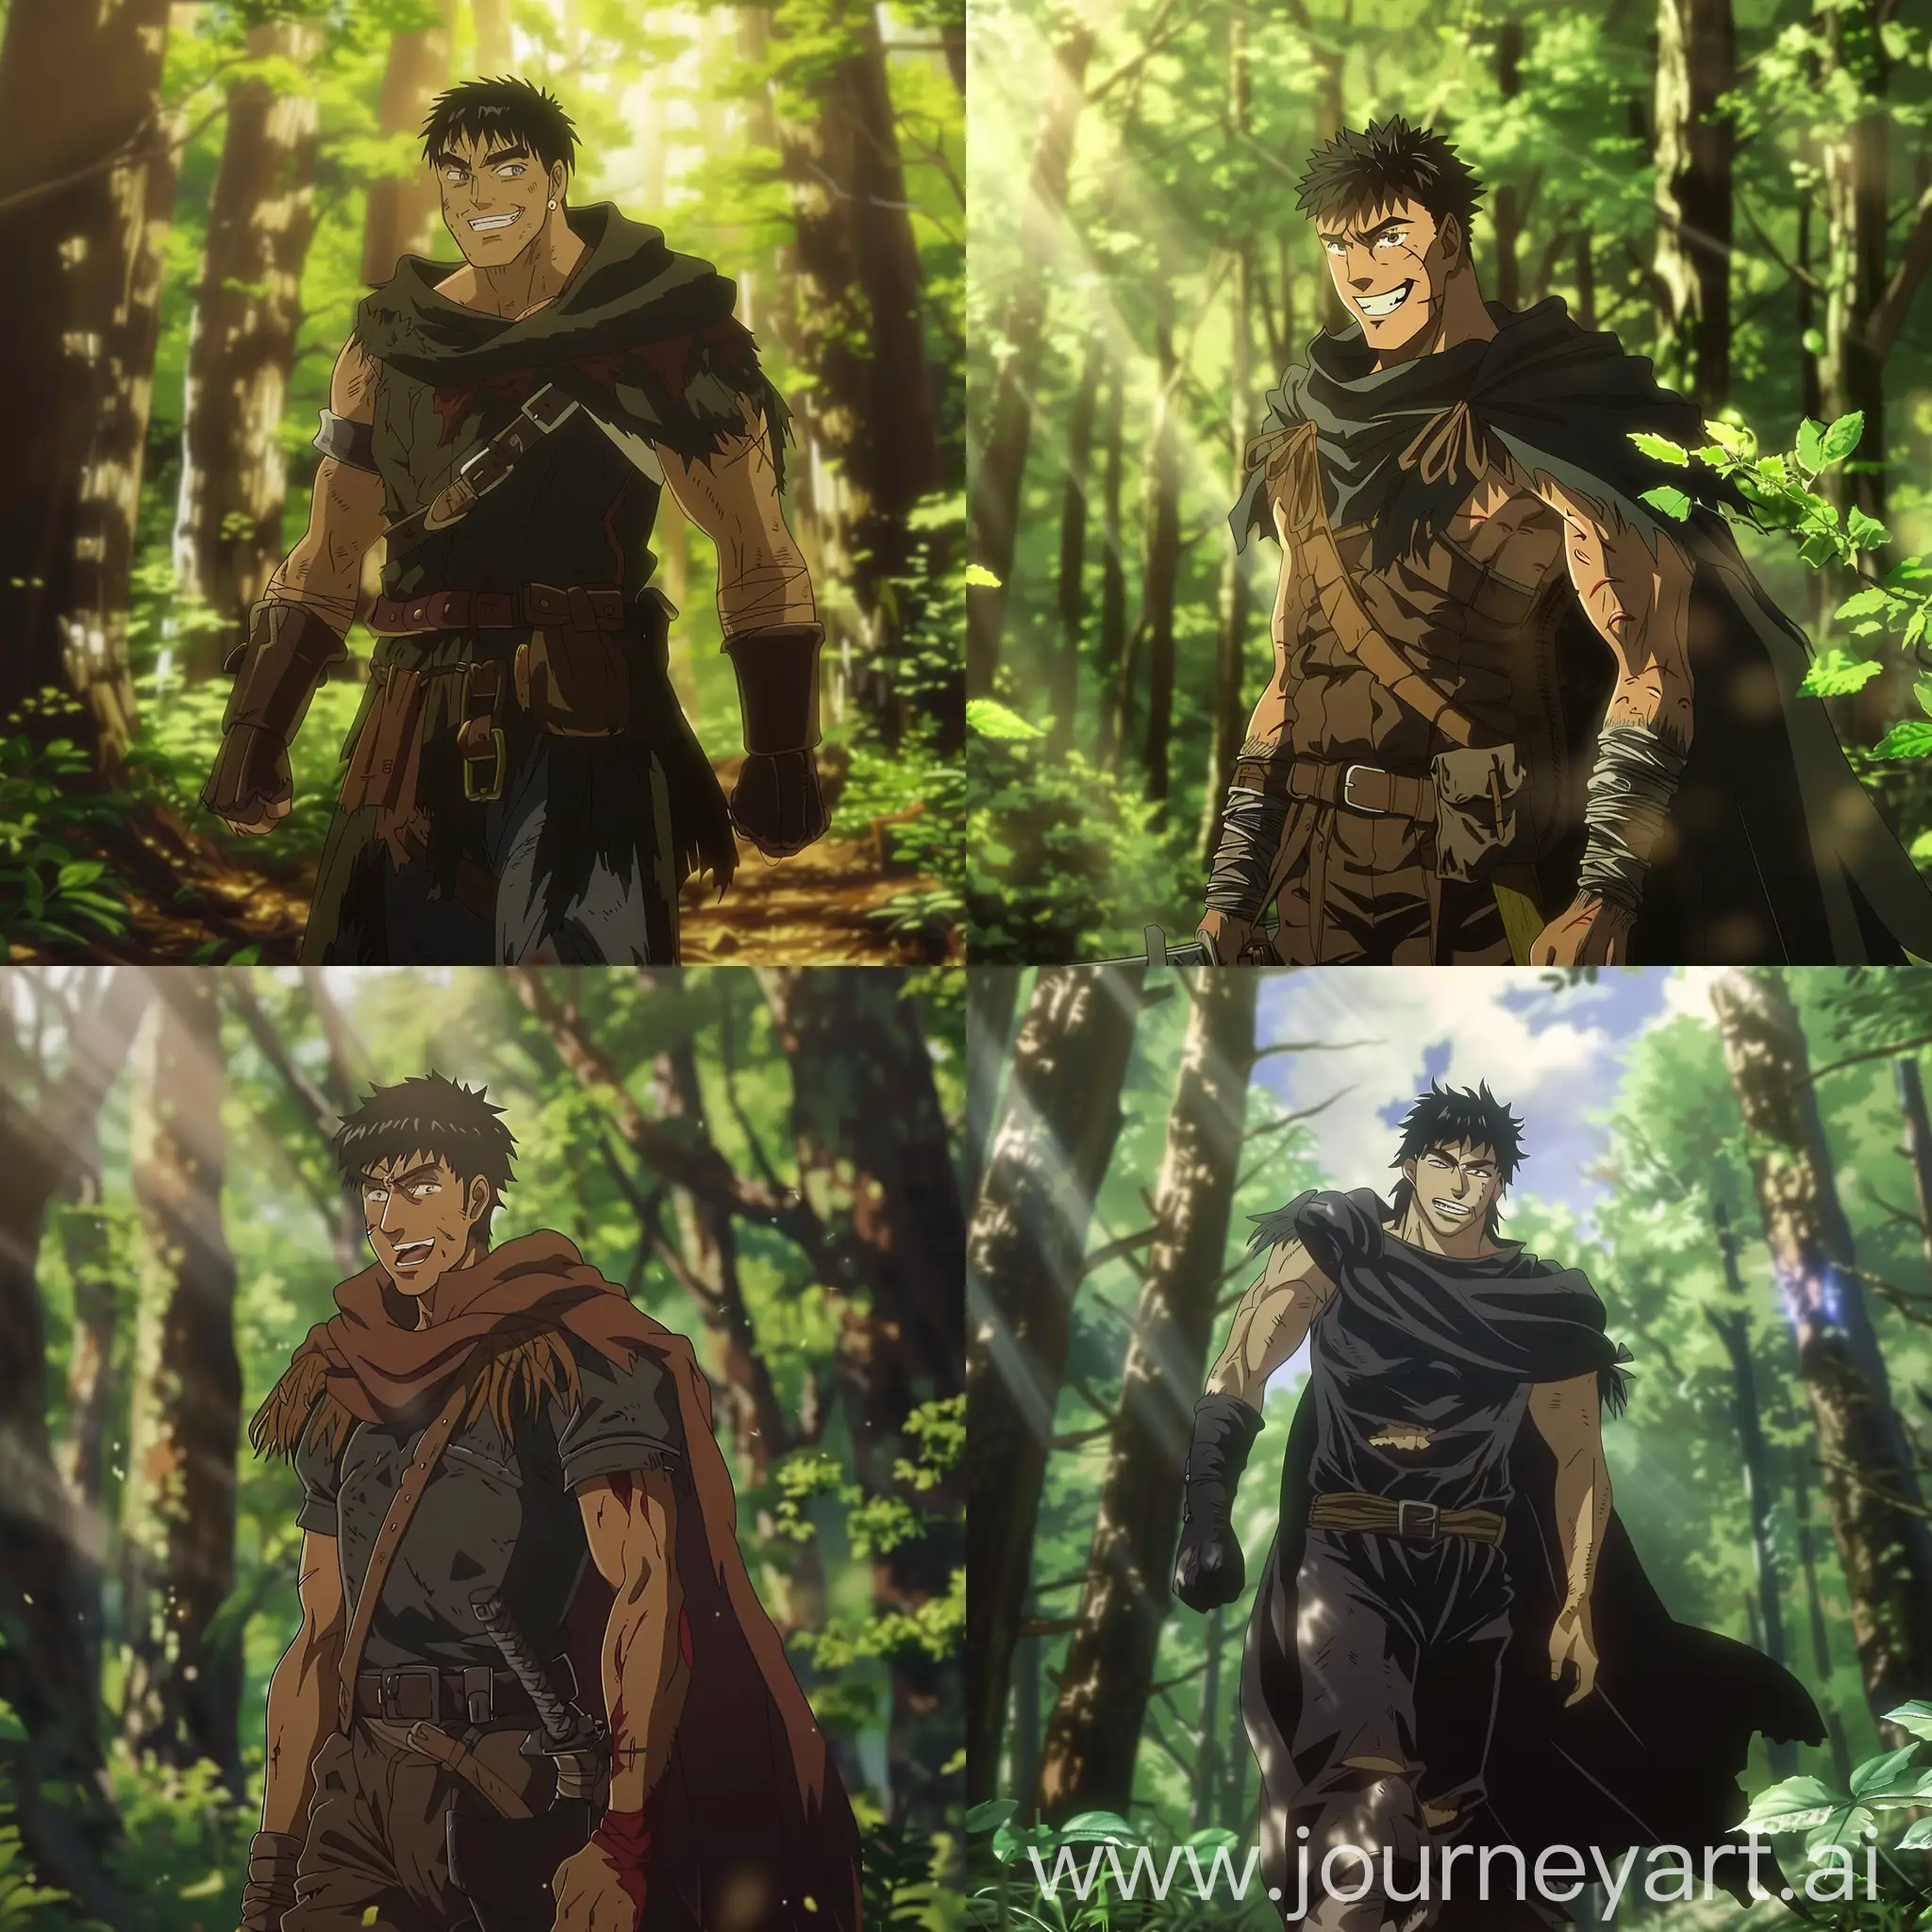 guts from anime berserk walking in the forest smiling